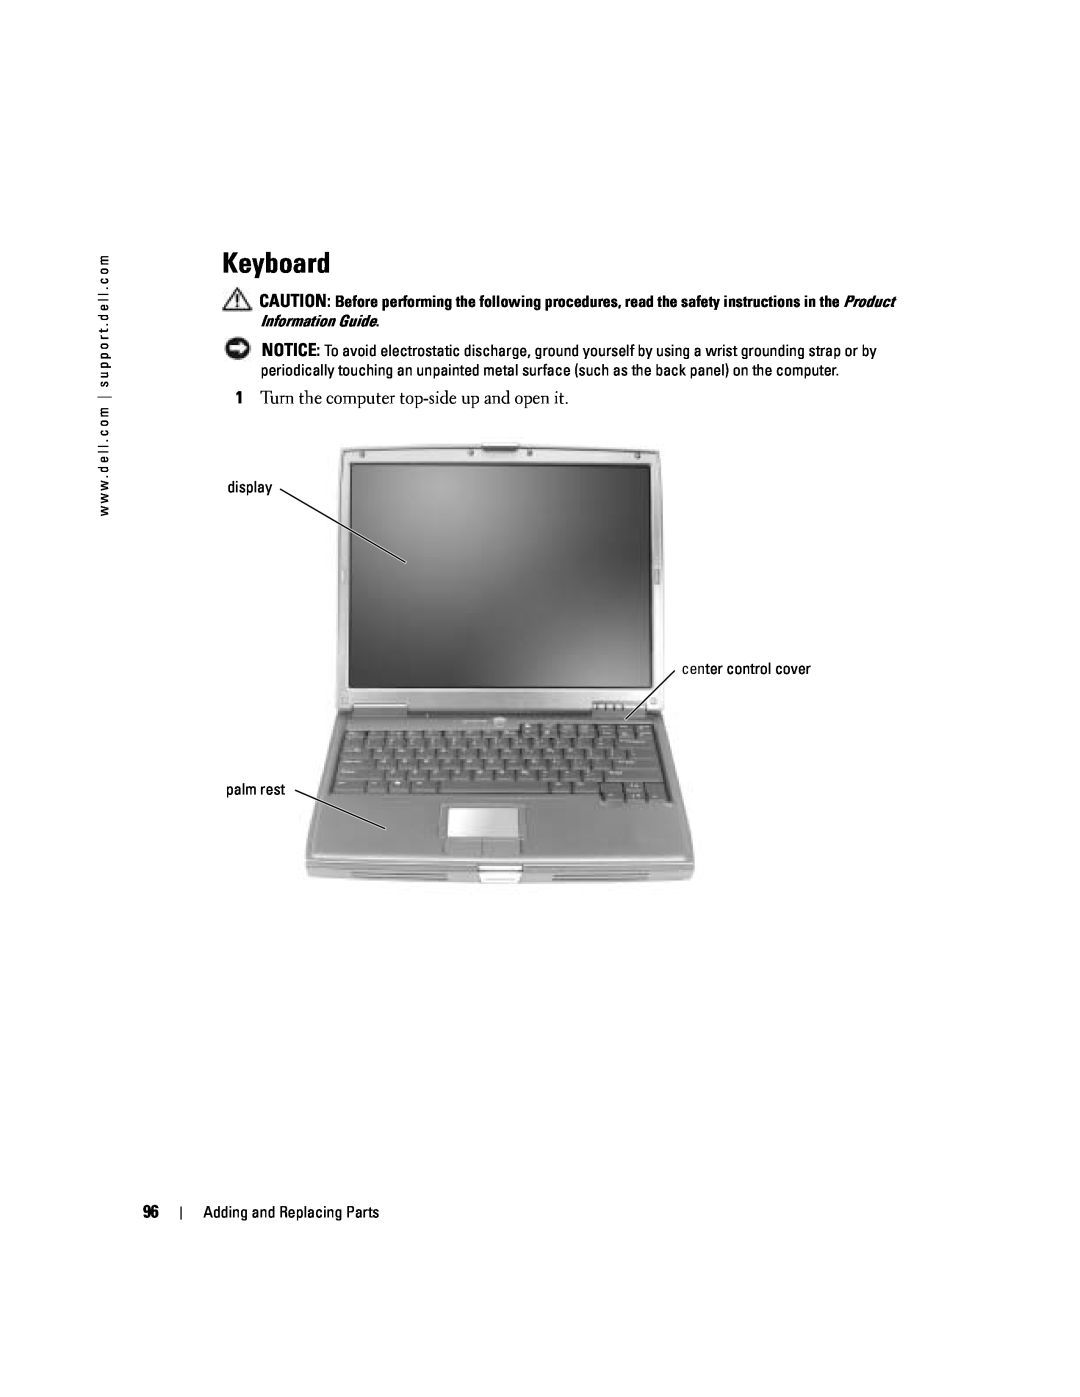 Dell PP10L owner manual Keyboard, Turn the computer top-side up and open it 